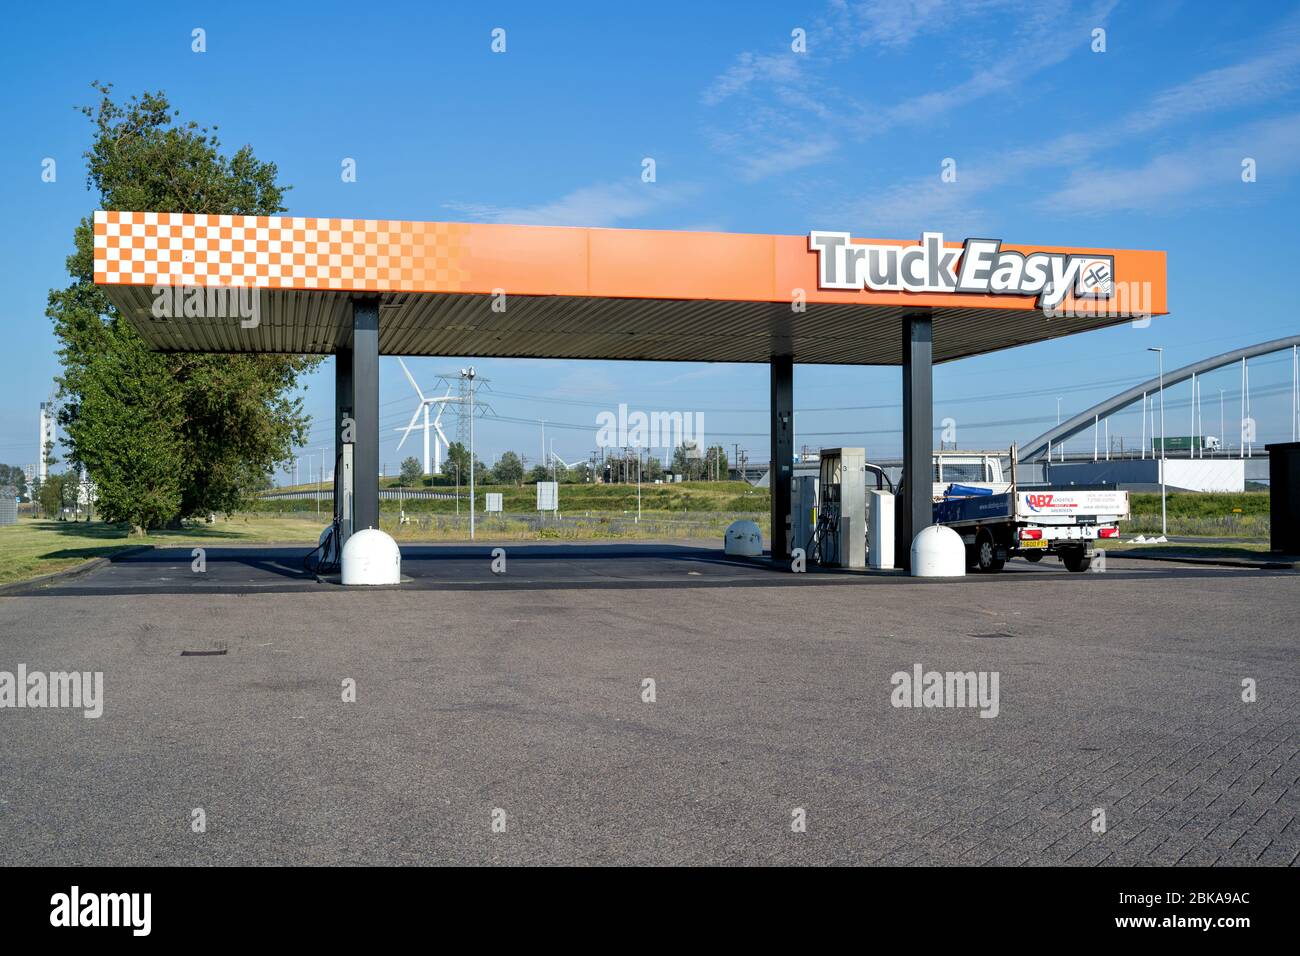 TruckEasy Beneluxhaven gas station. The TruckEasy gas stations can be found at 22 locations in the Netherlands, along the main transport routes. Stock Photo